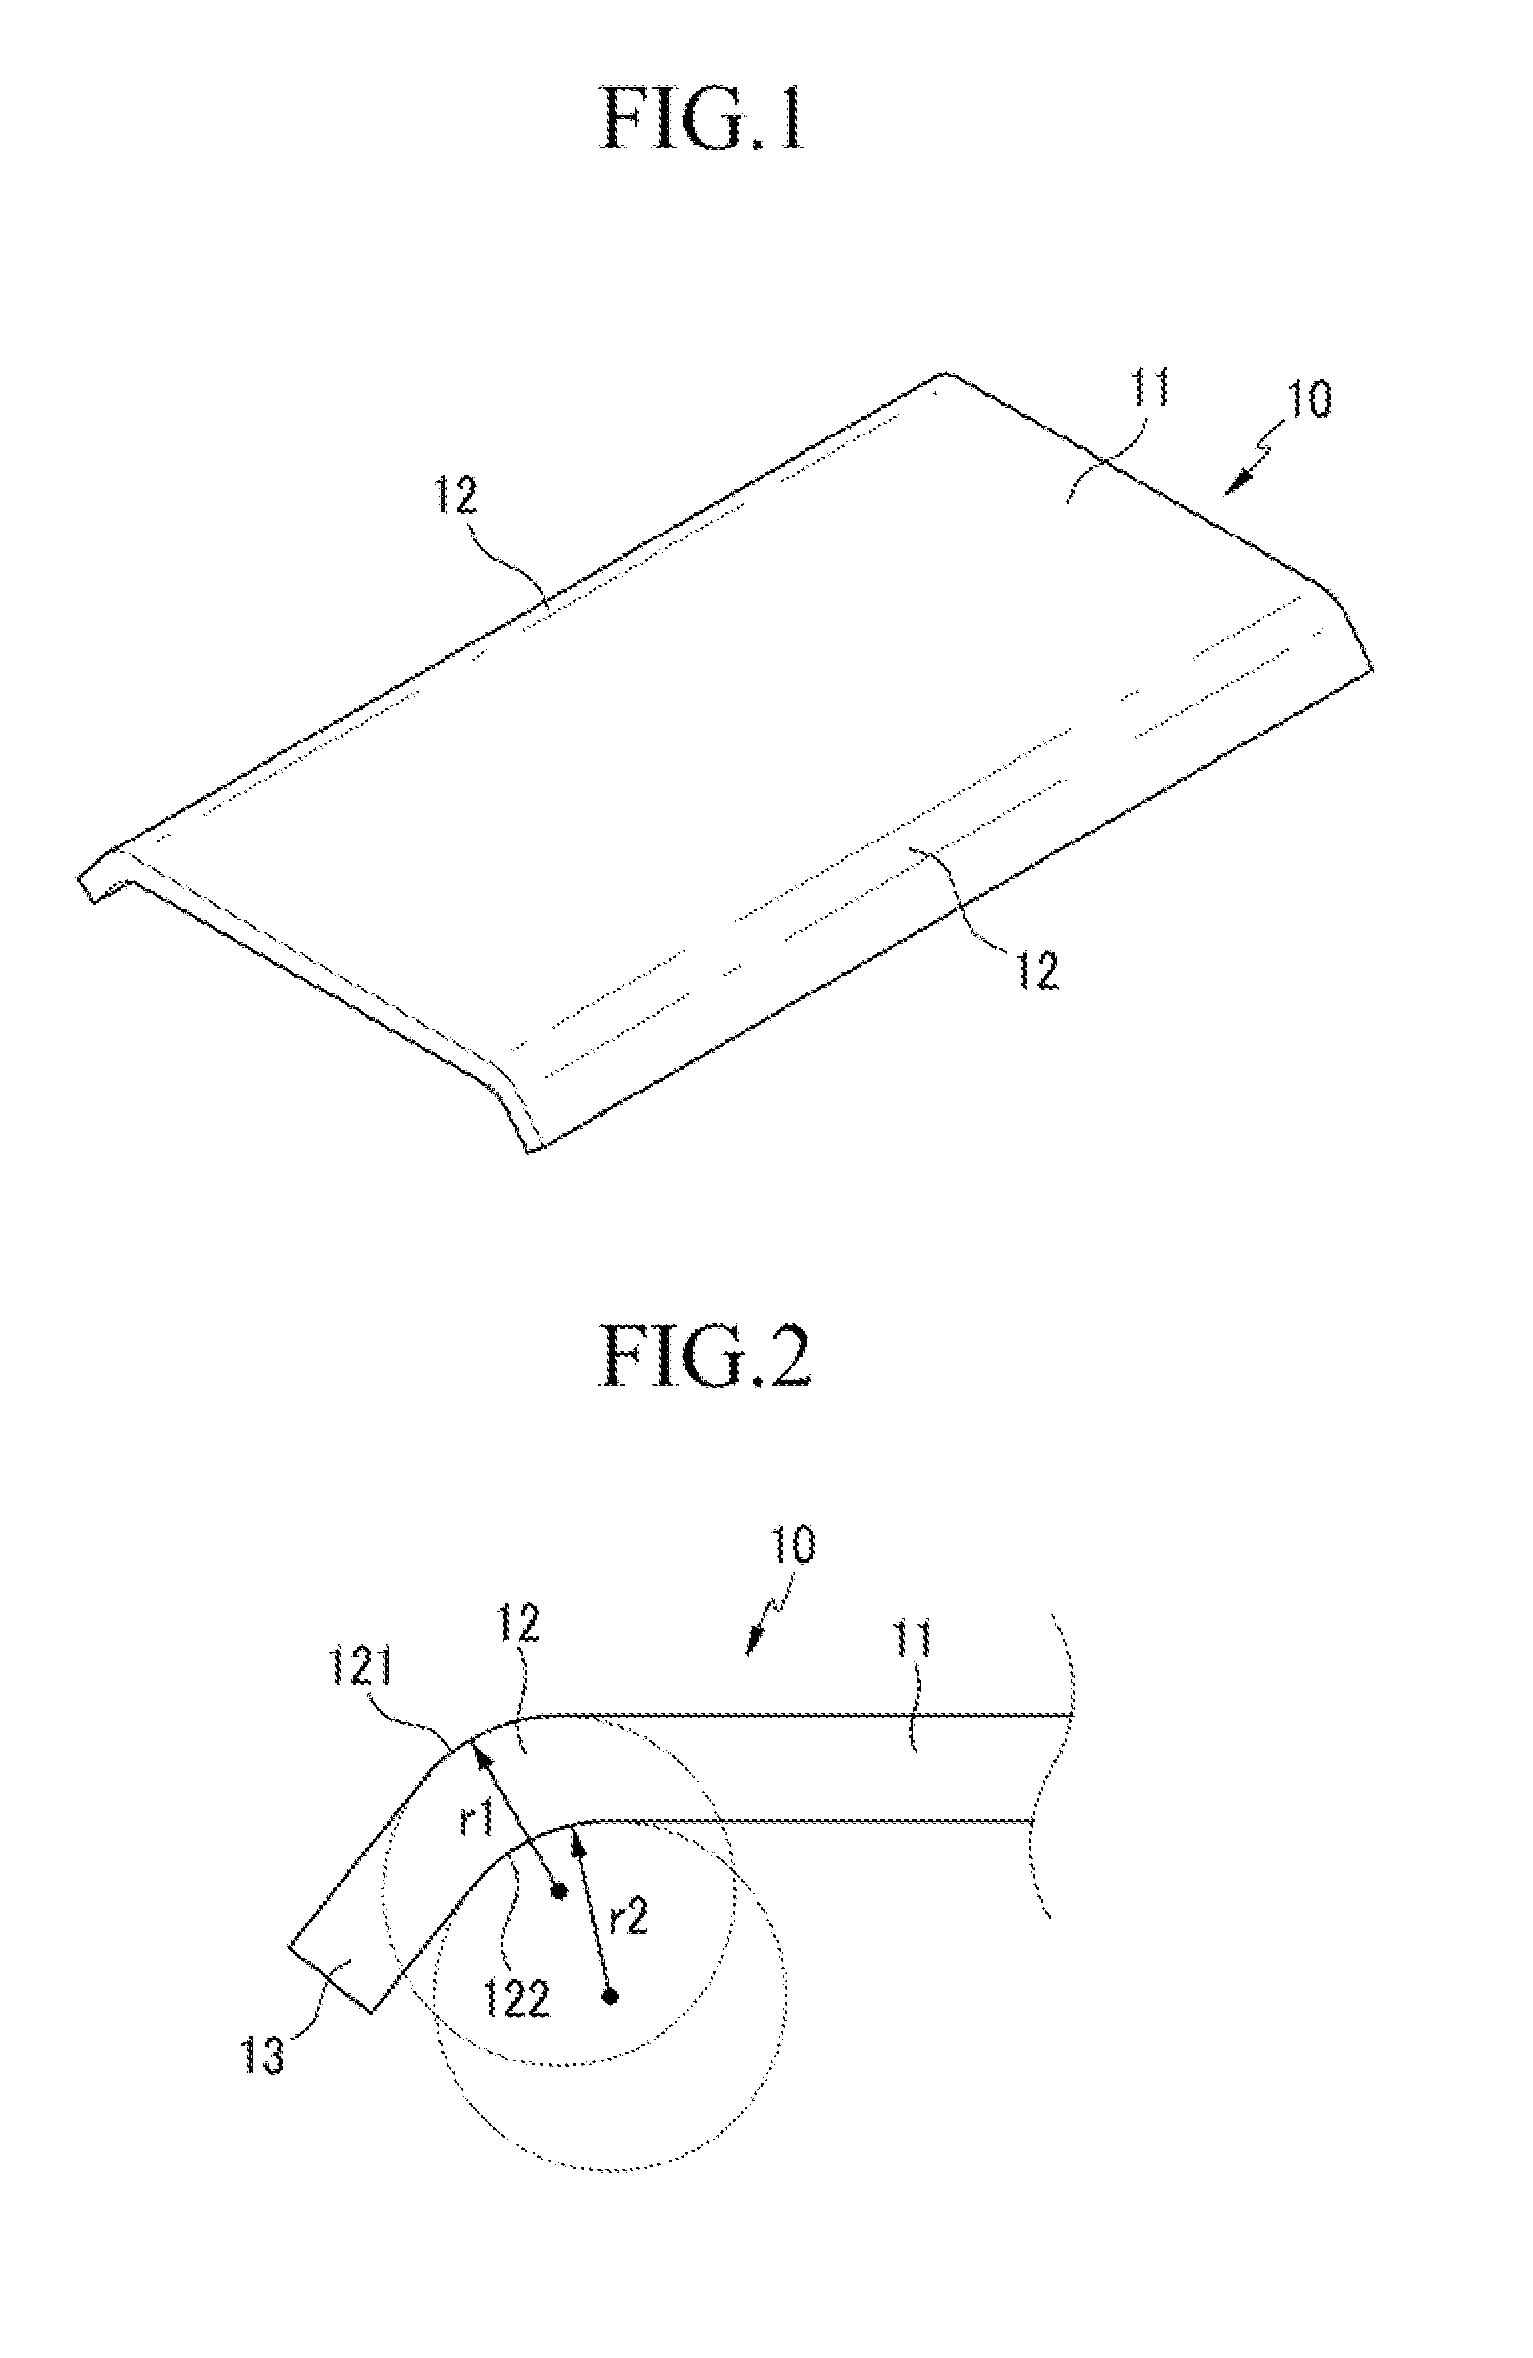 Cover window and display device with cover window